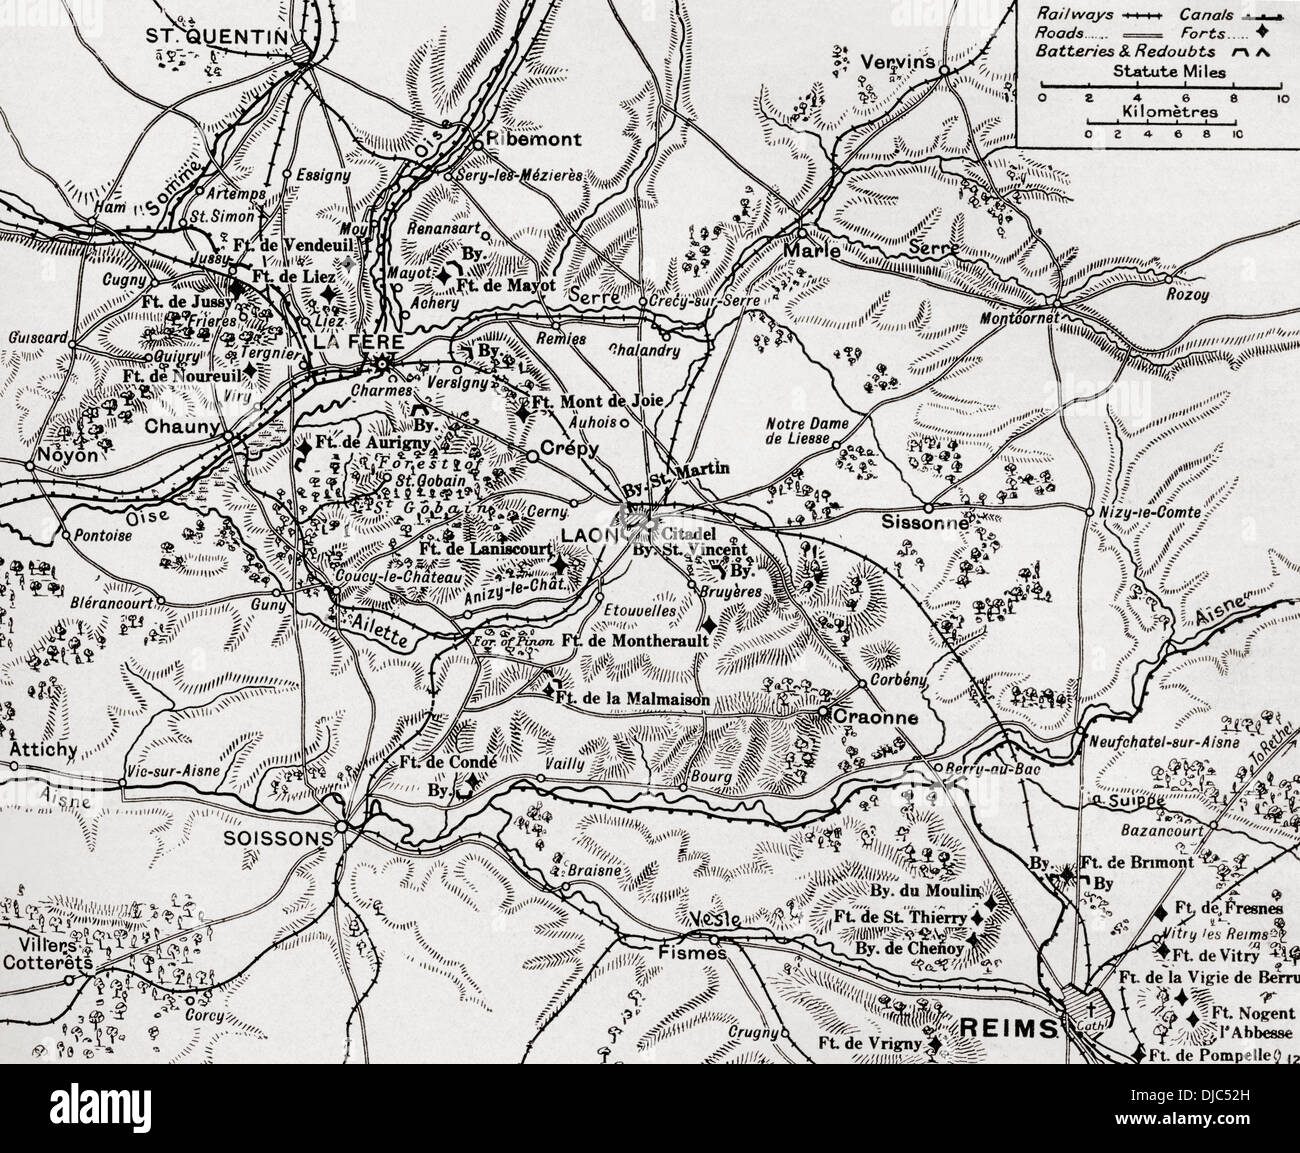 Map illustrating the region of the First Battle of the Aisne, fought along the Rivers Aisne, Oise and Somme, France during WWI. Stock Photo